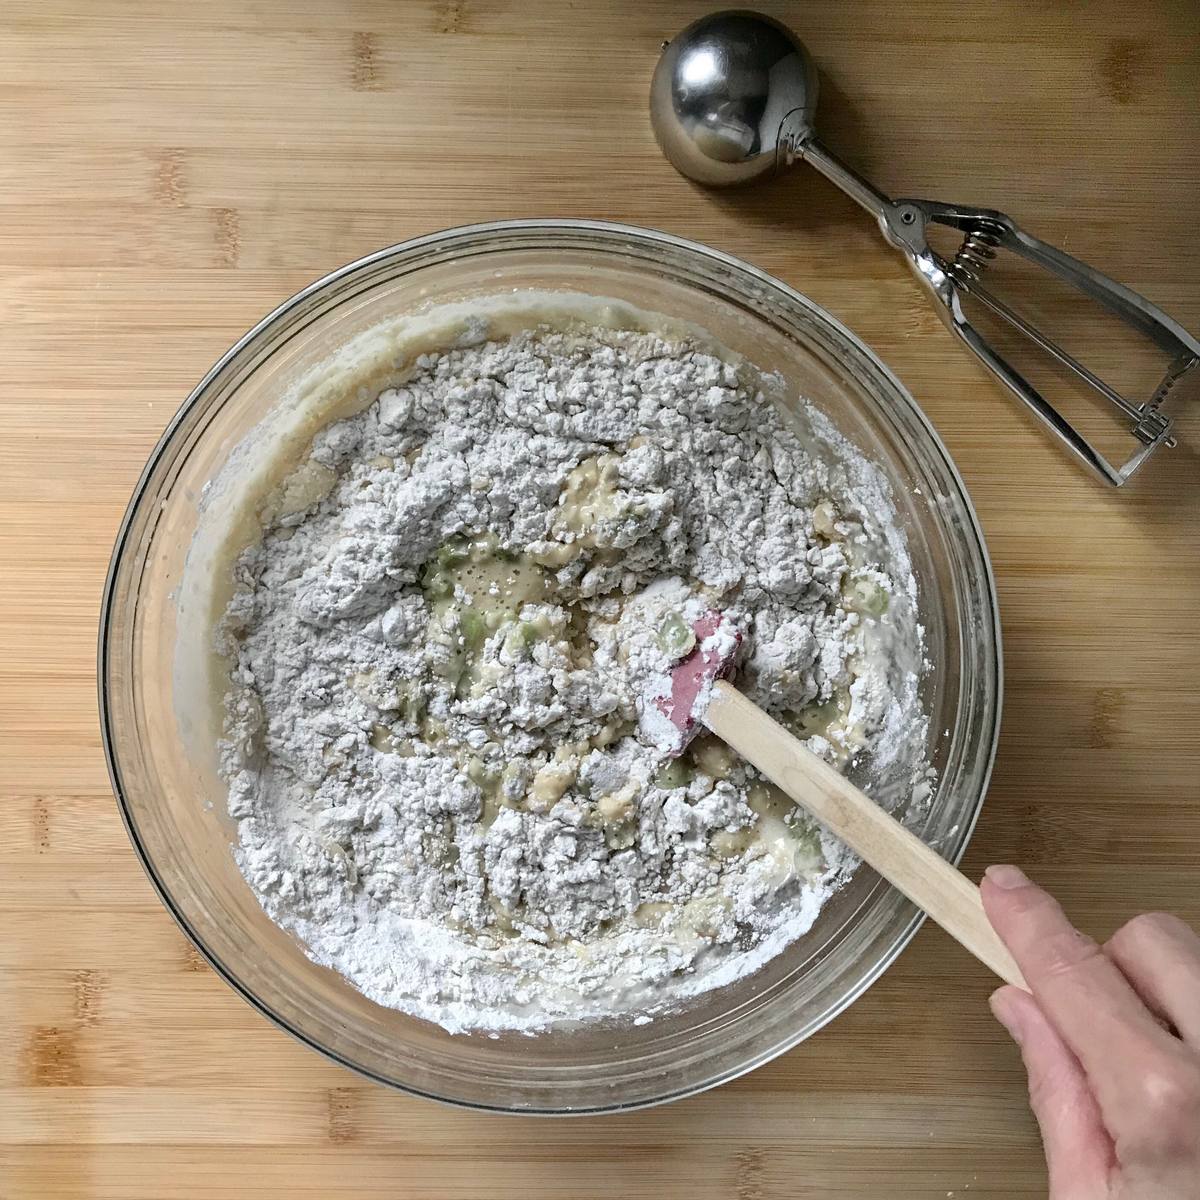 The wet and dry ingredients to make muffins are combined in a bowl.